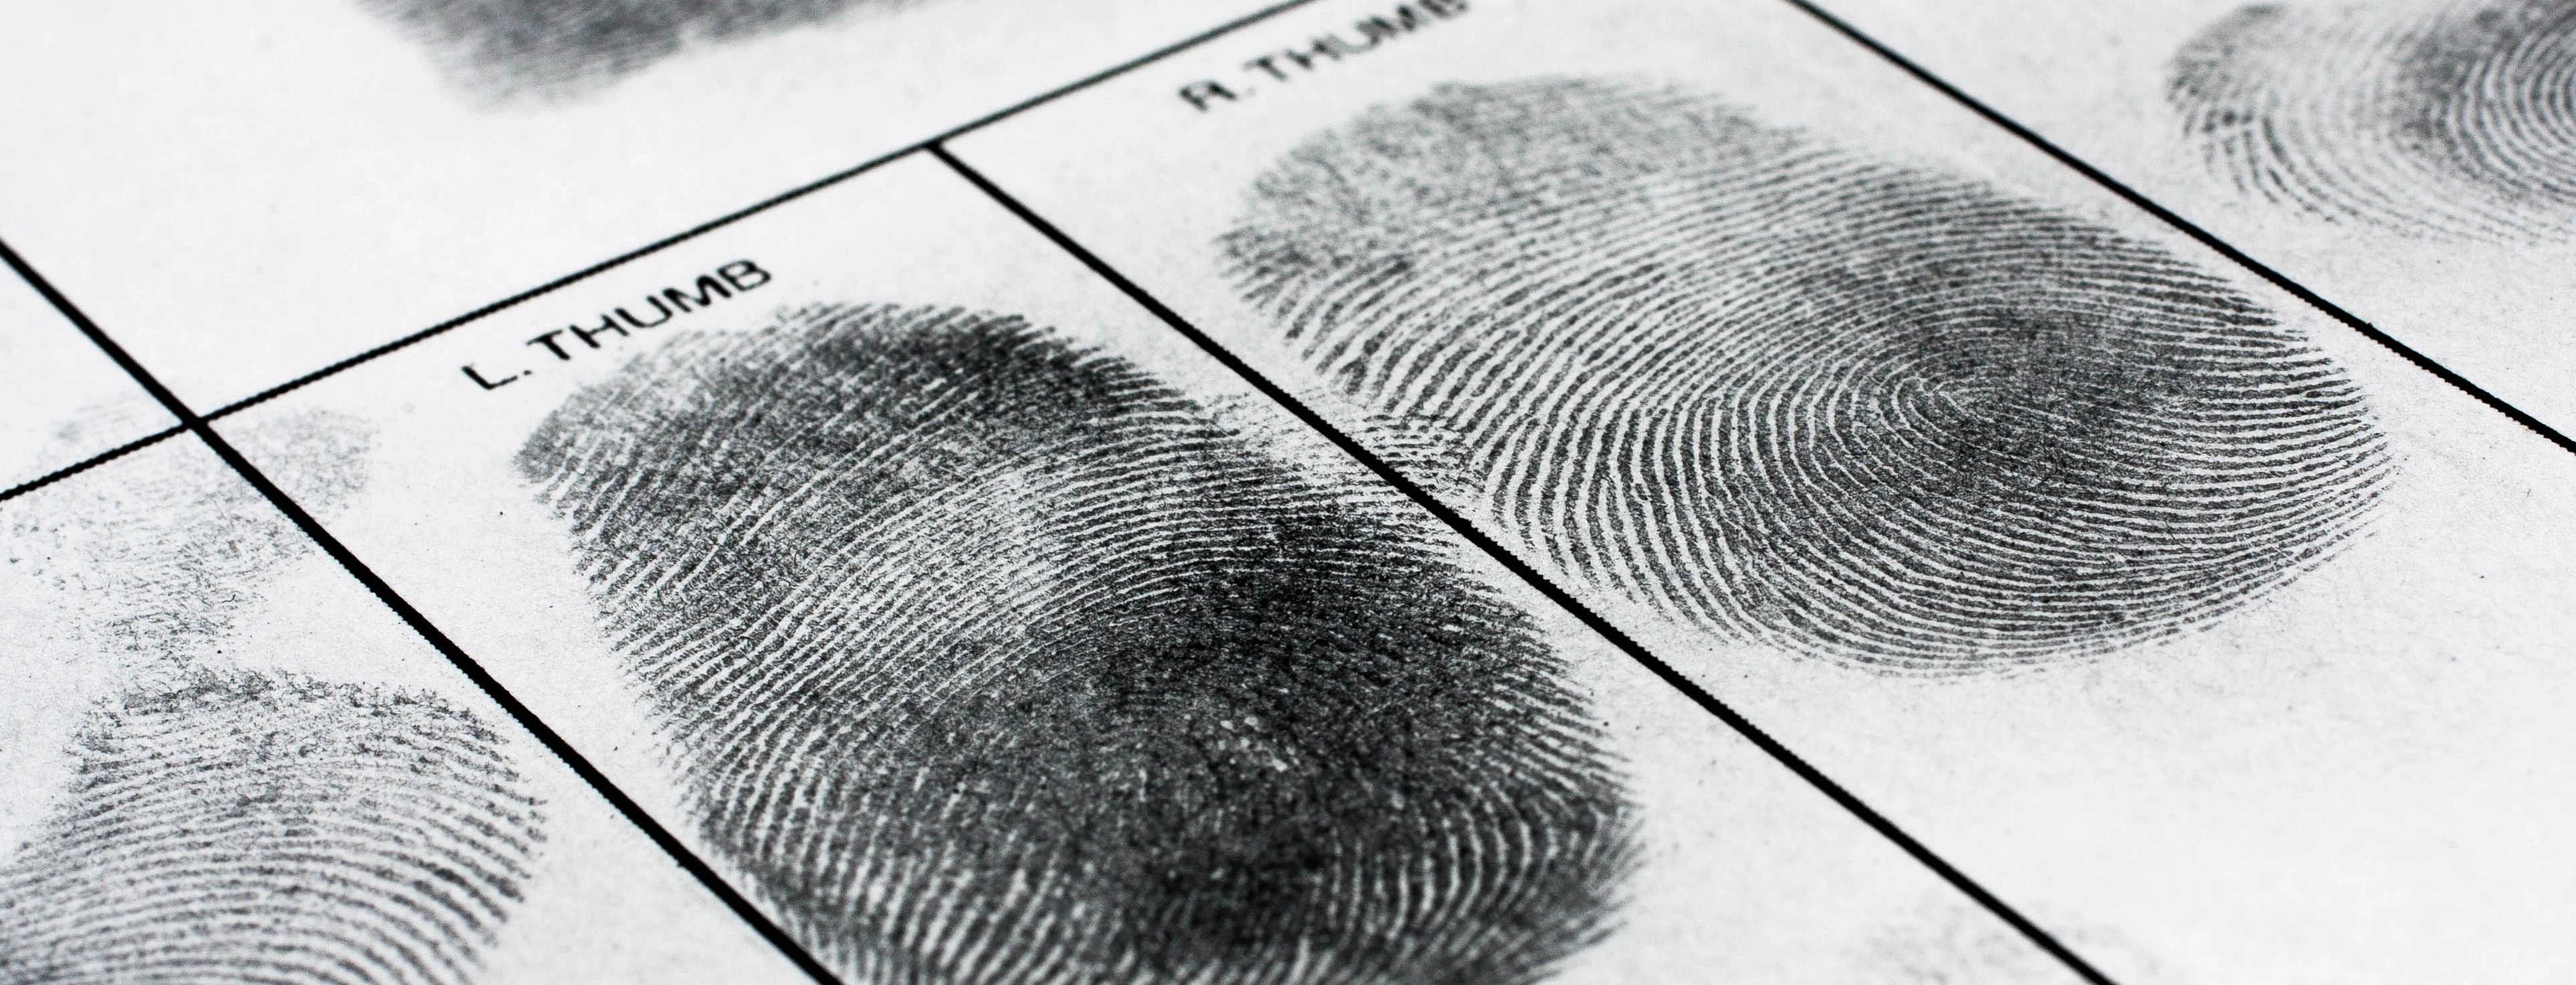 Fingerprint Forensics: Interview with Philip Gilhooley